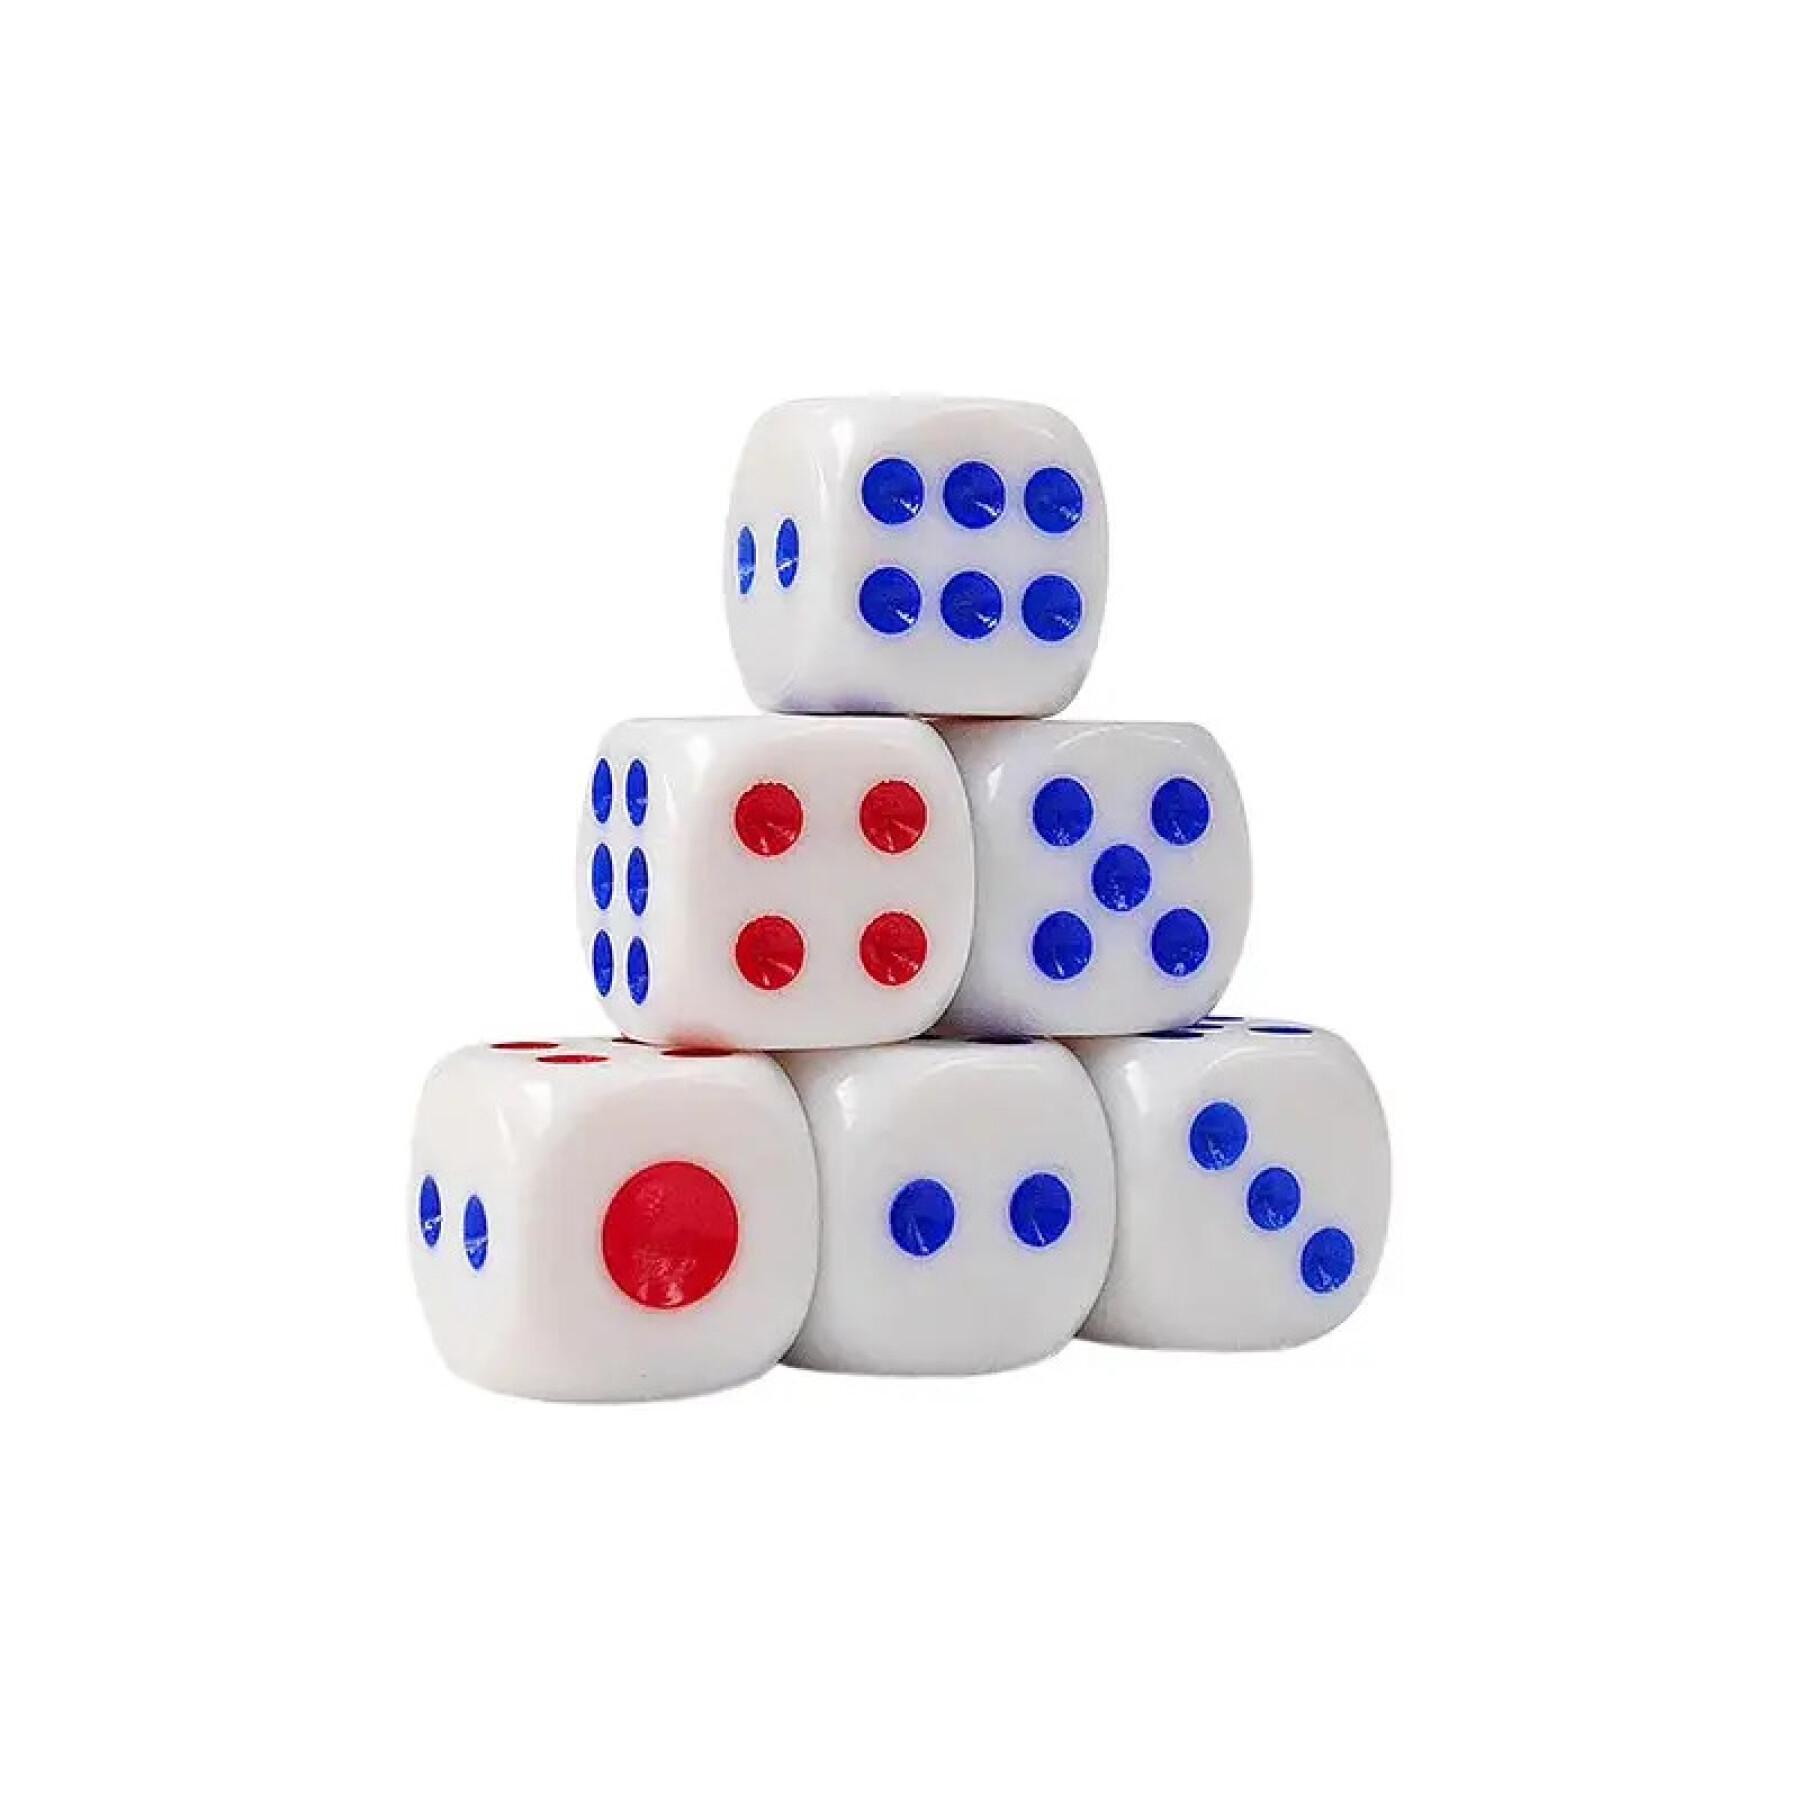 Board games - set of 5 dice Softee 1.0